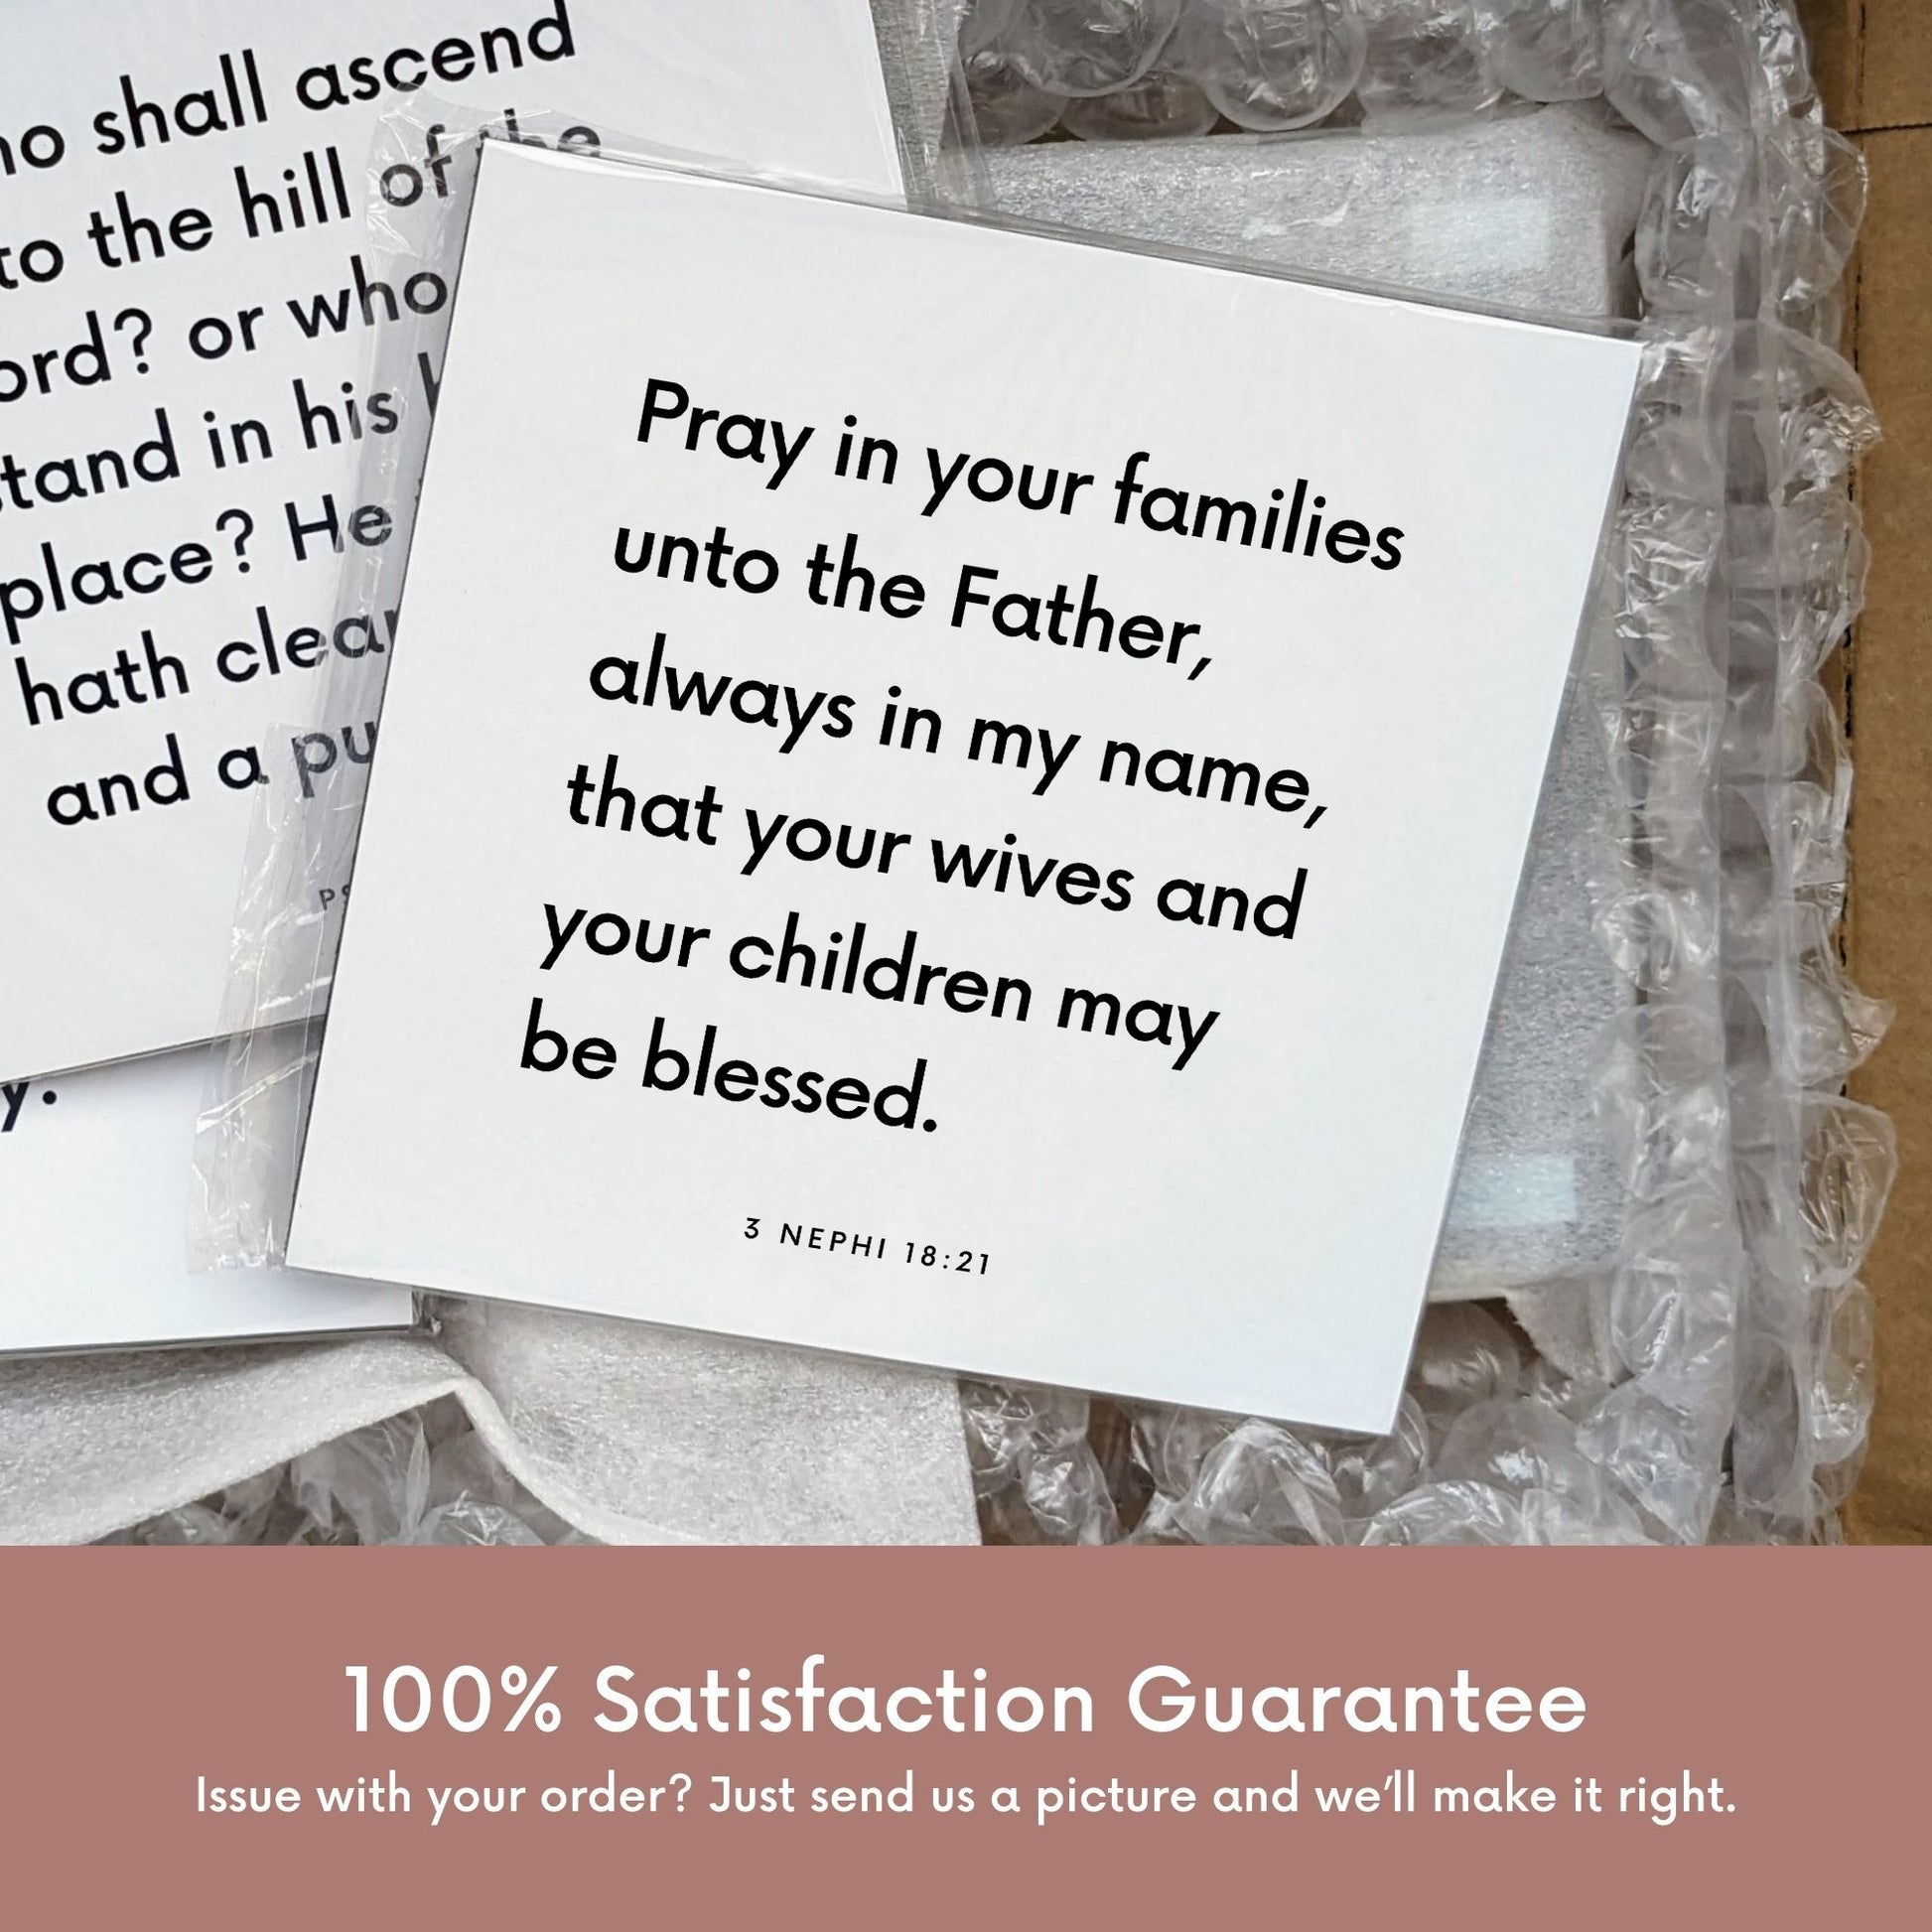 Shipping materials for scripture tile of 3 Nephi 18:21 - "Pray in your families unto the Father"